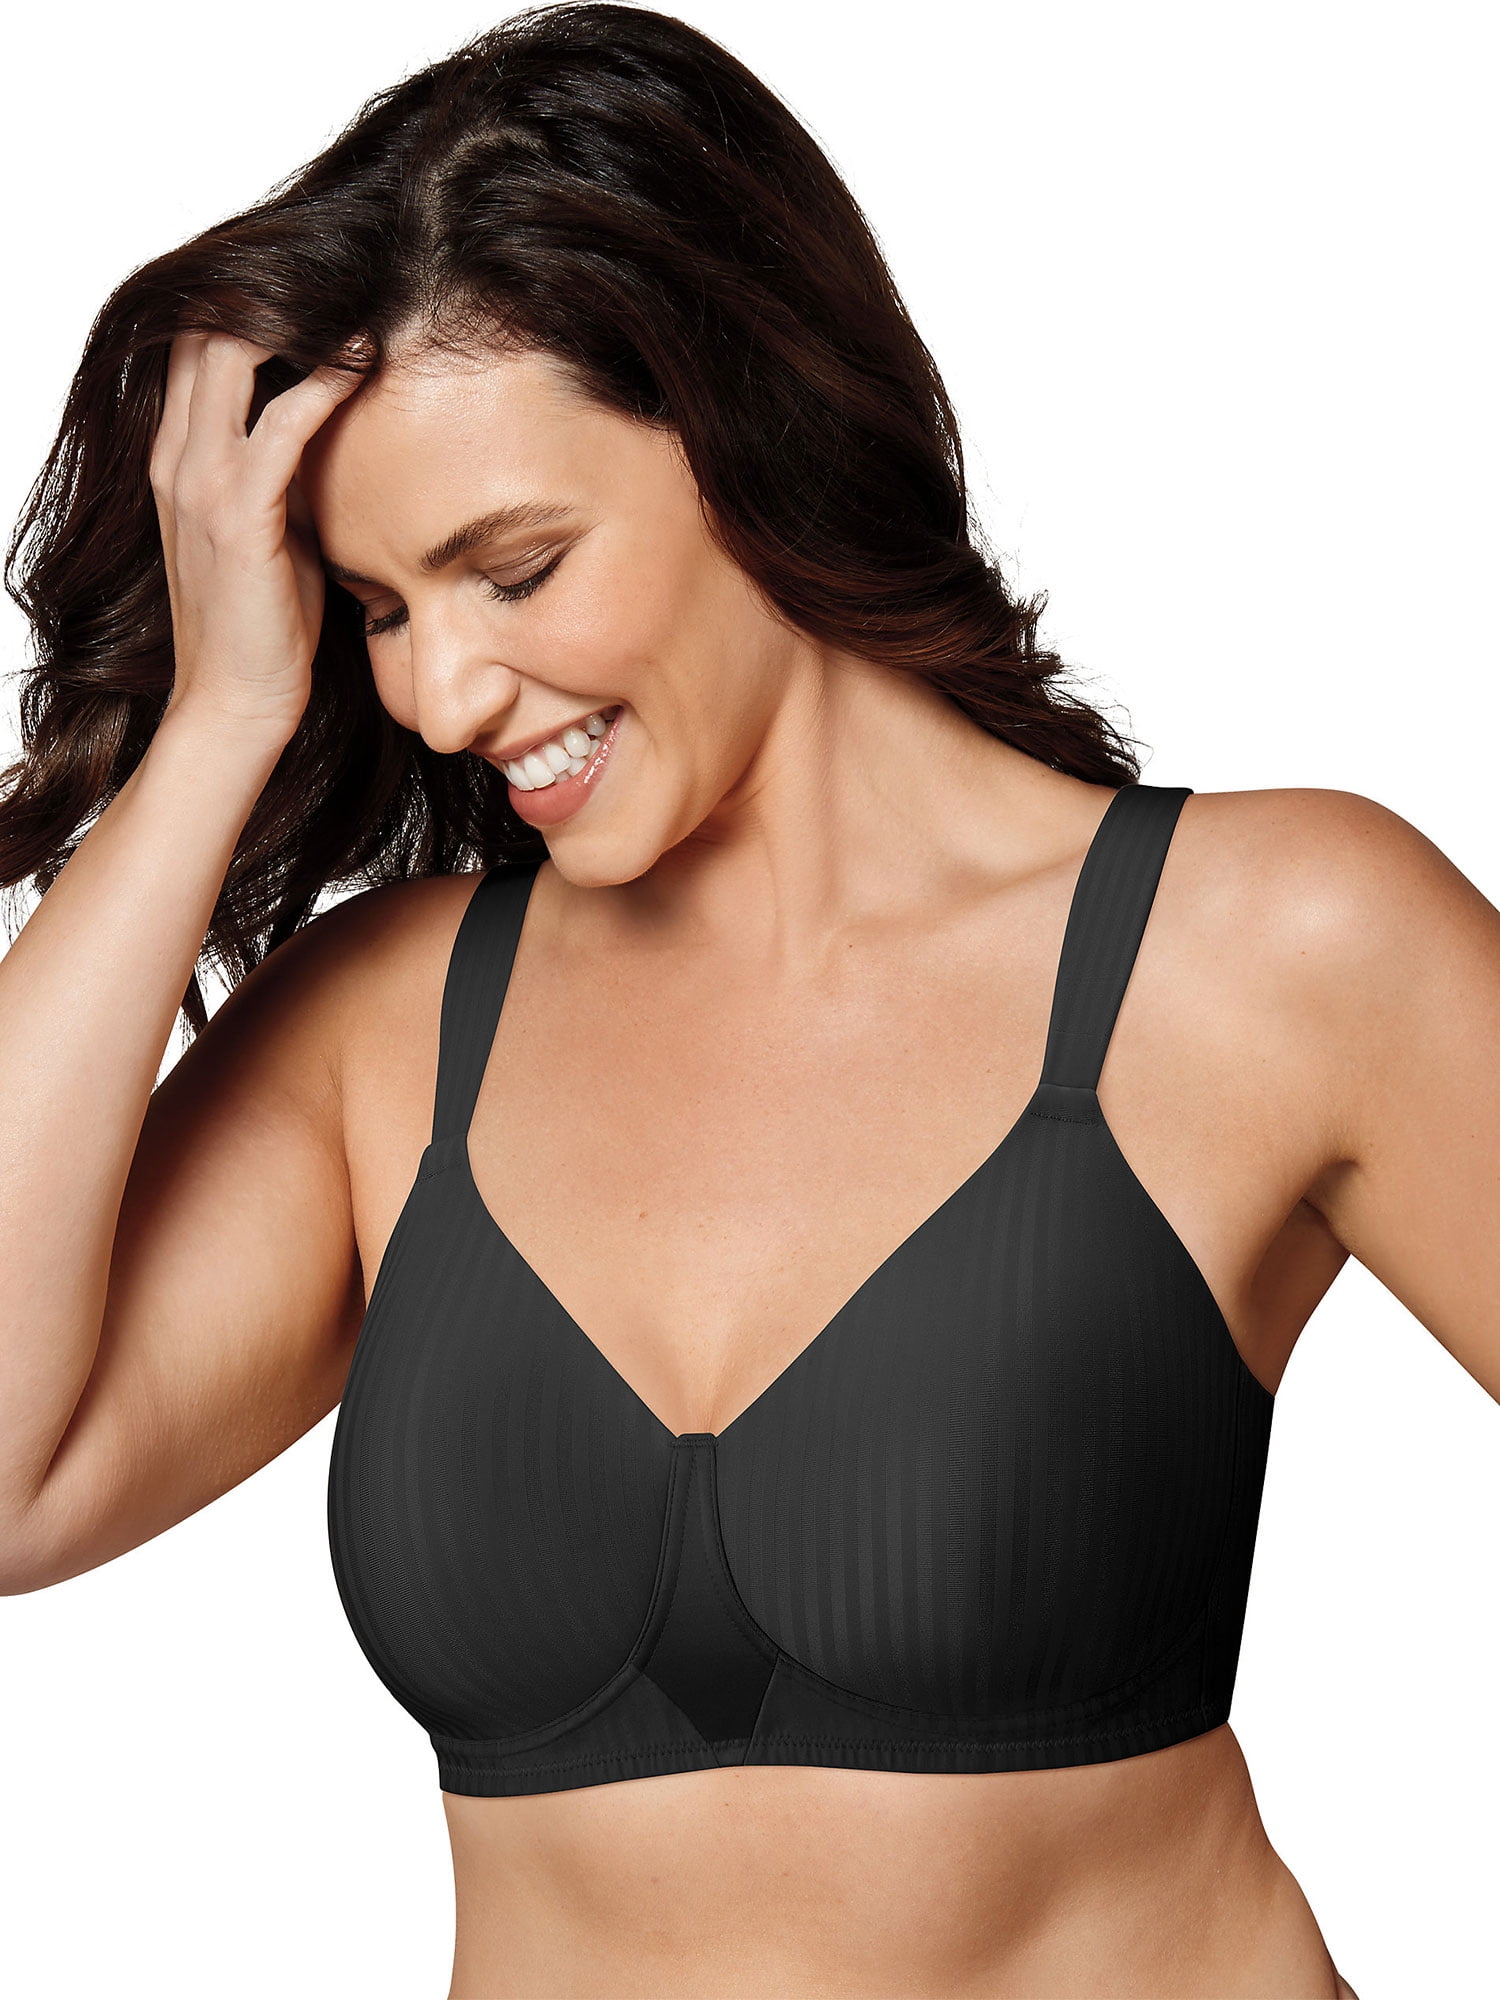  PSWK Bra for Women with Big Breasts Hot Wire Free